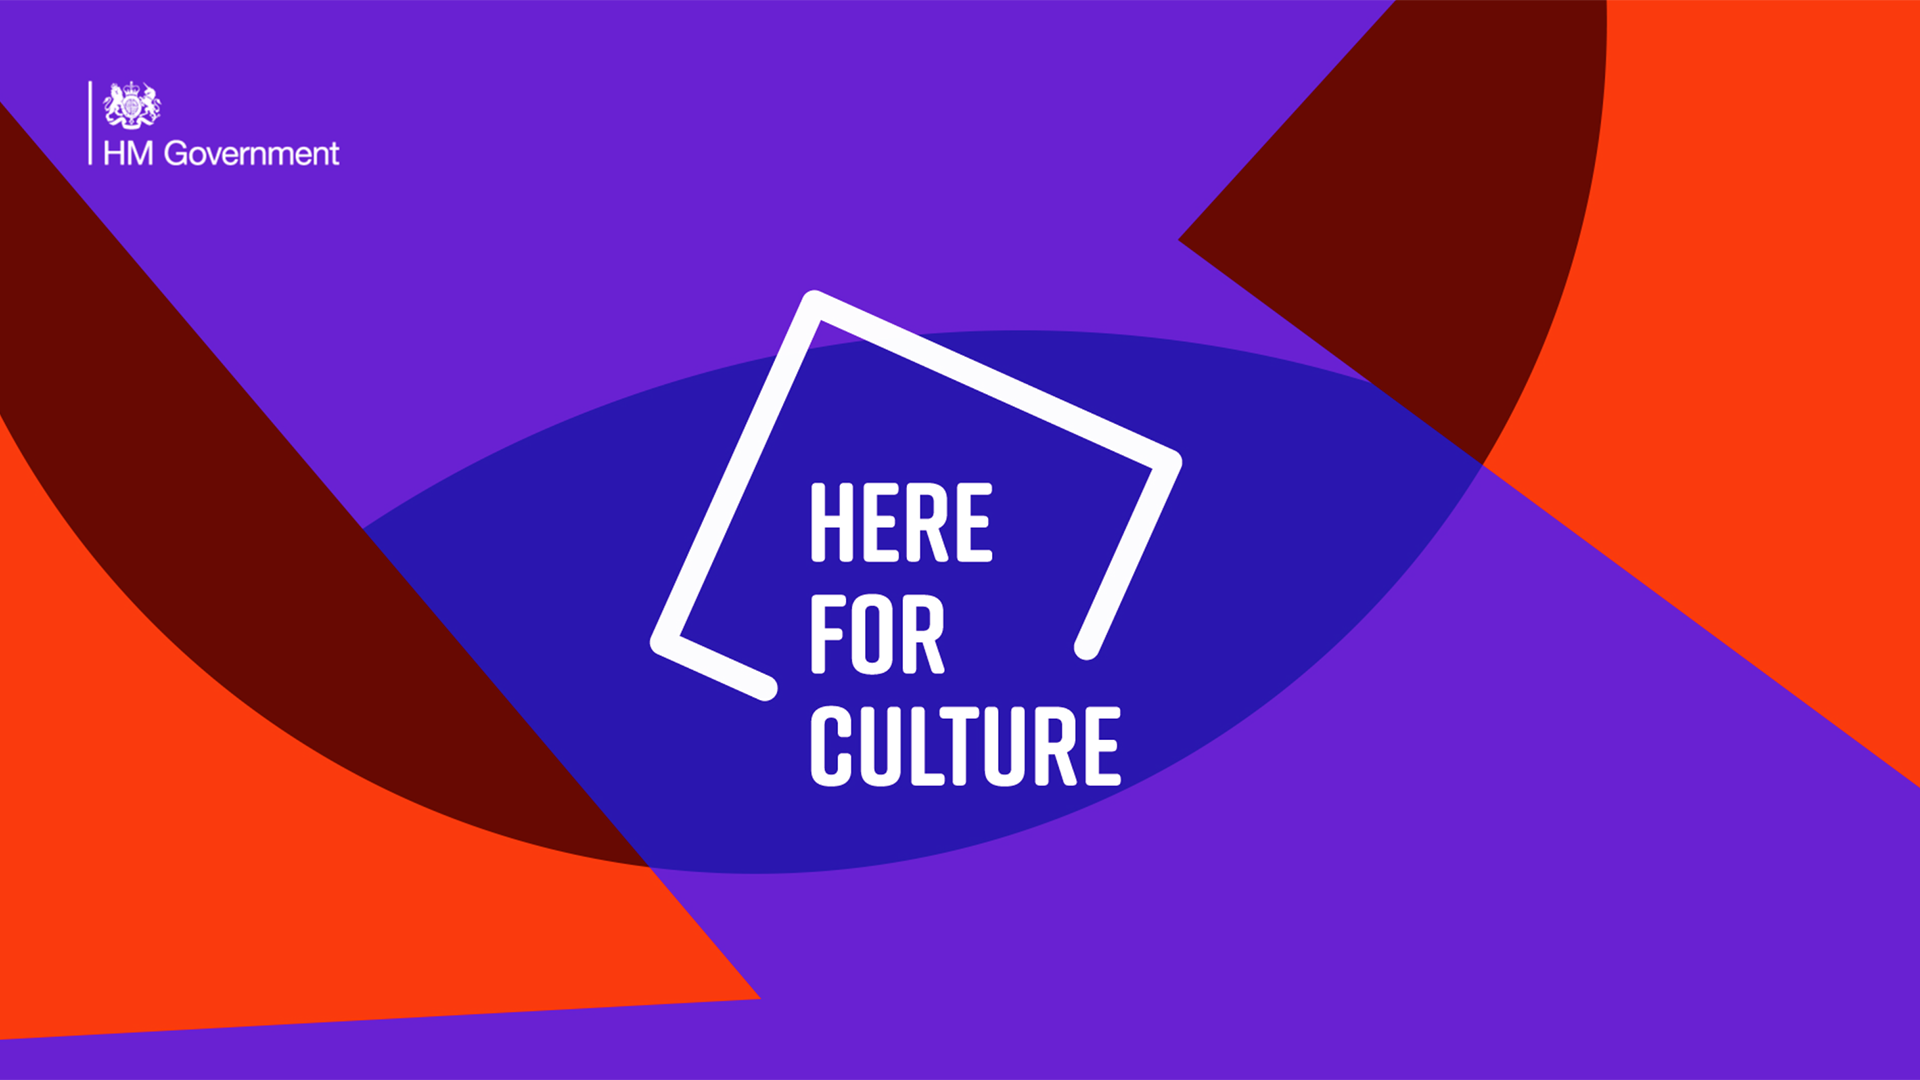 We are #HereForCulture headline graphic on branded Here for Culture background in red, pink, green and orange